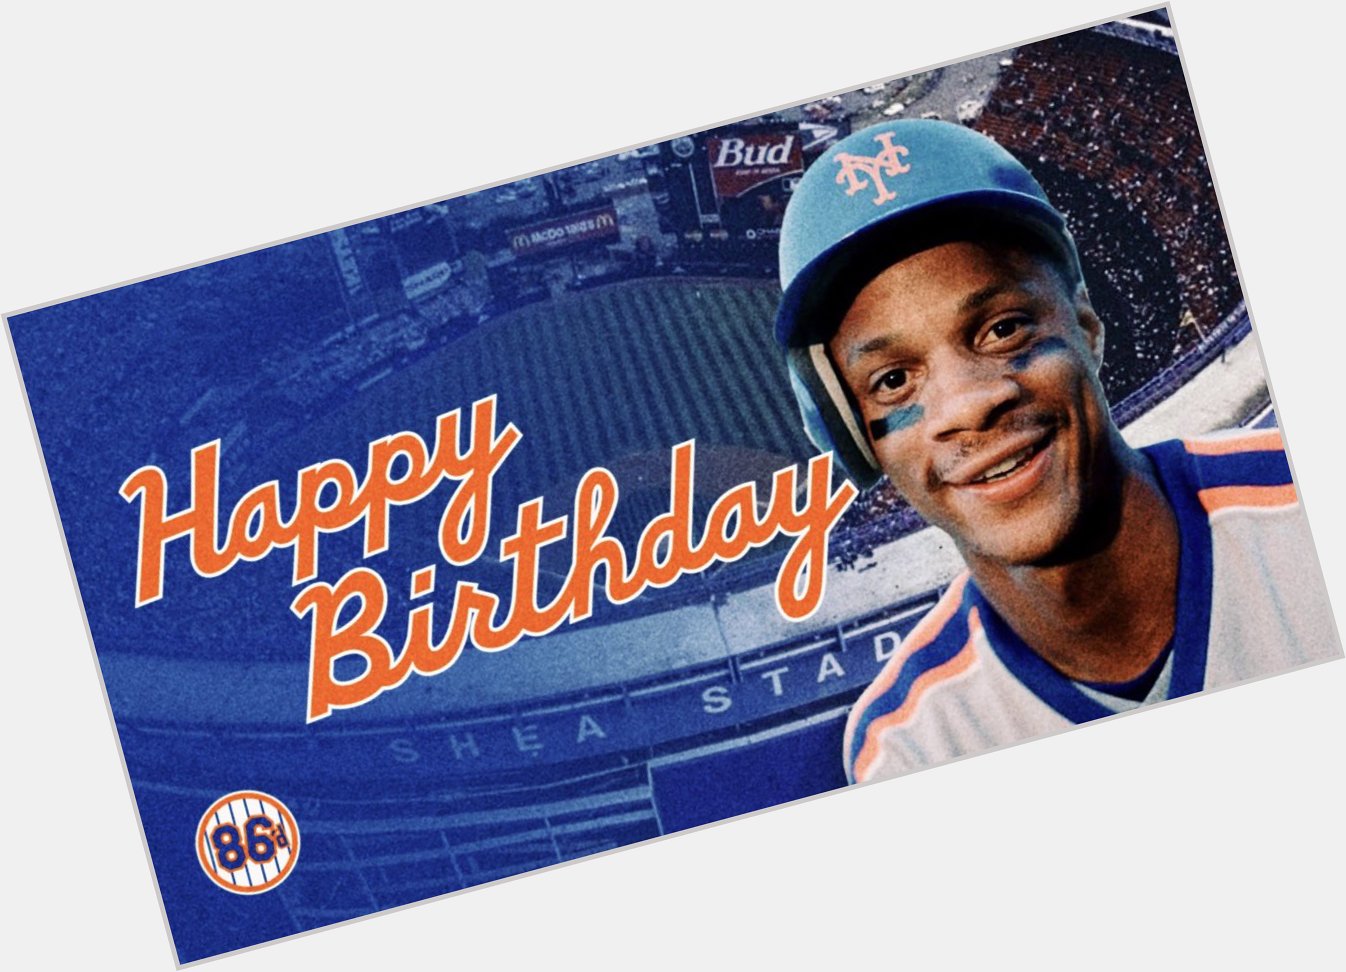 Happy birthday to the sweetest swing in history, Darryl Strawberry   